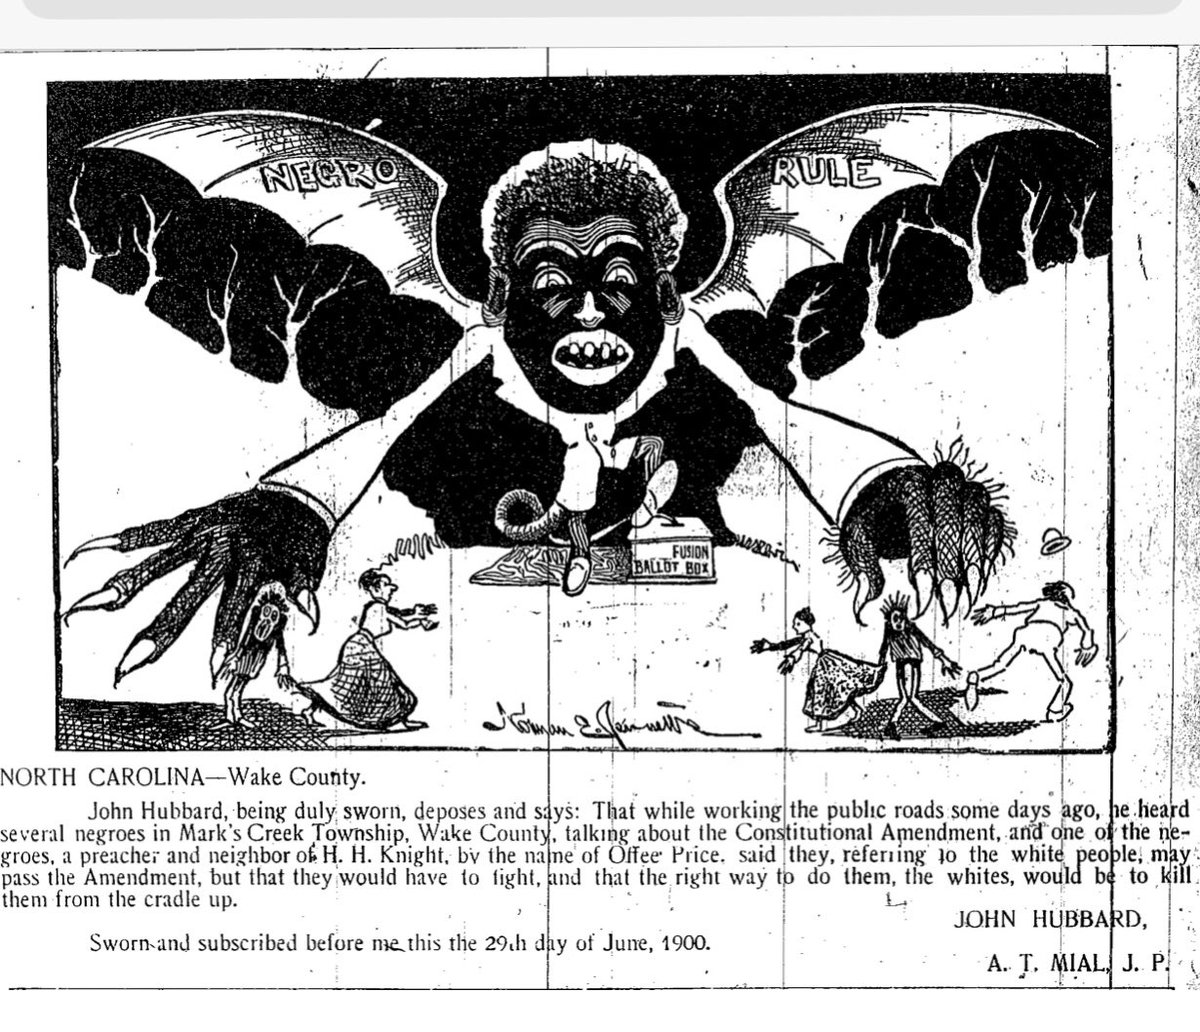 That I found from a North Carolina newspaper in 1900. They published an unbelievably racist political cartoon decrying Blacks voting (and making political decisions for whites) as “Negro Rule”  https://cwnc.omeka.chass.ncsu.edu/items/show/325 